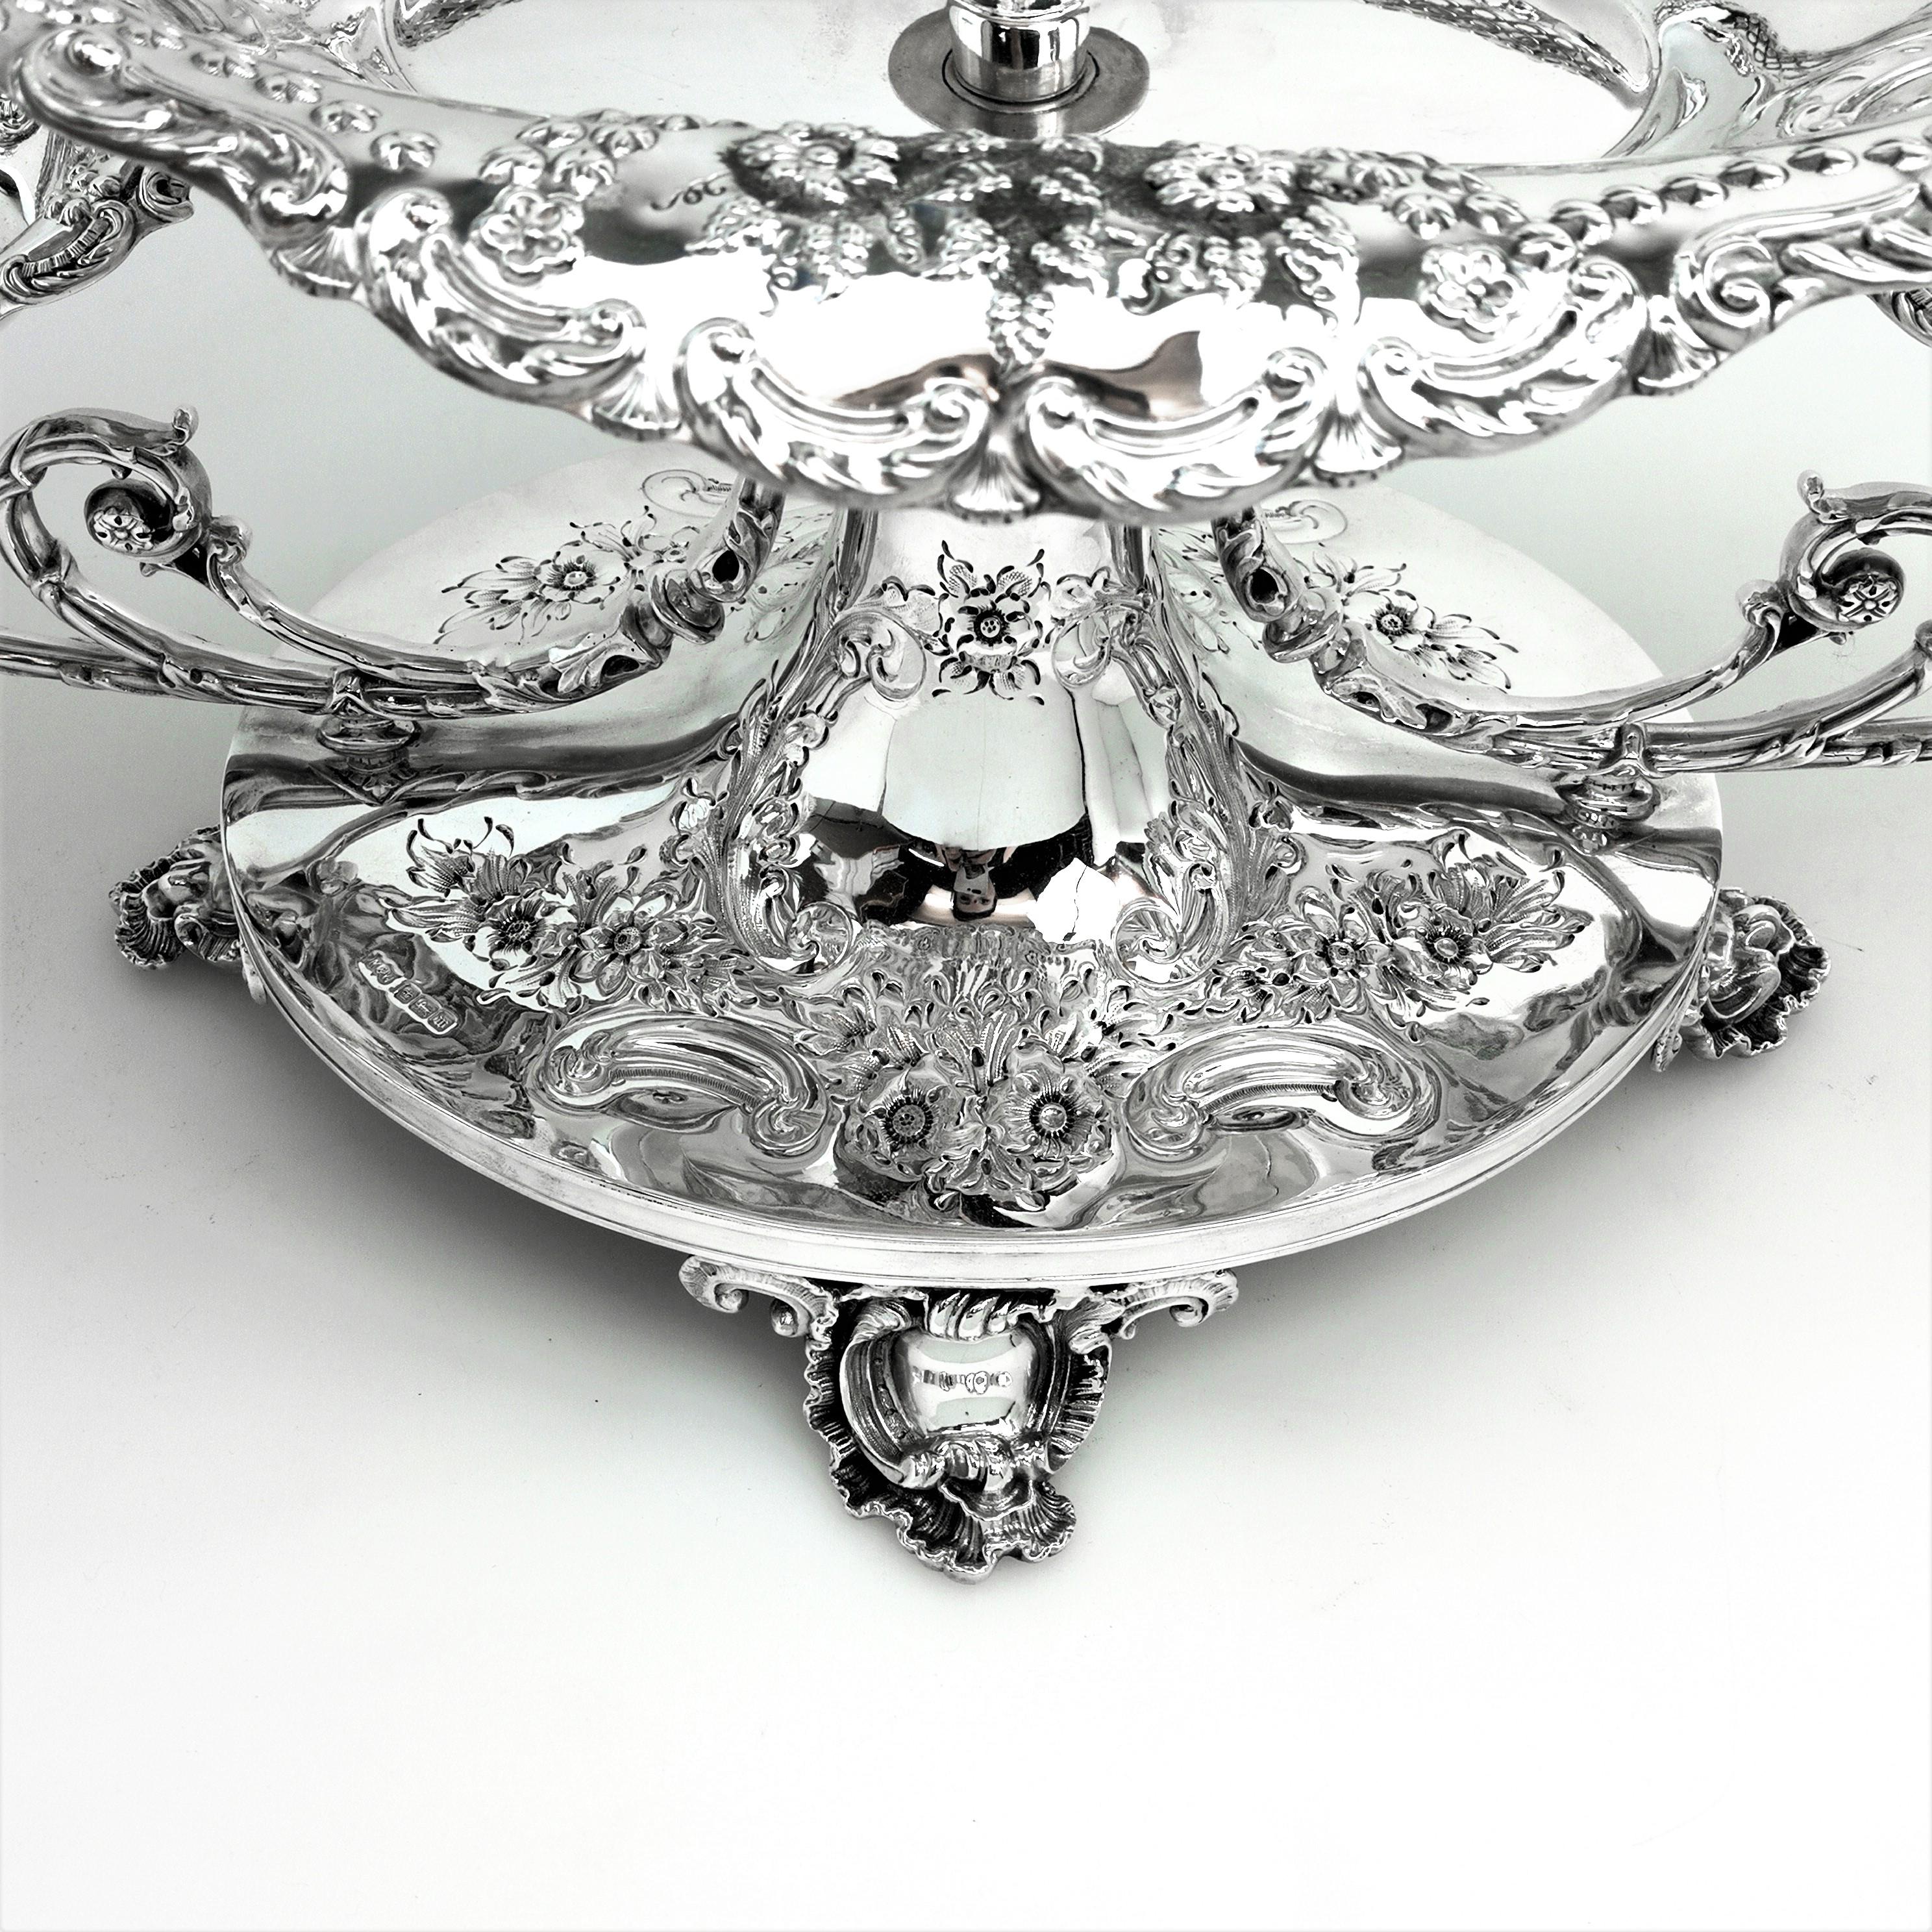 Early 20th Century Large Antique Sterling Silver Epergne / Centrepiece Sheffield, 1914